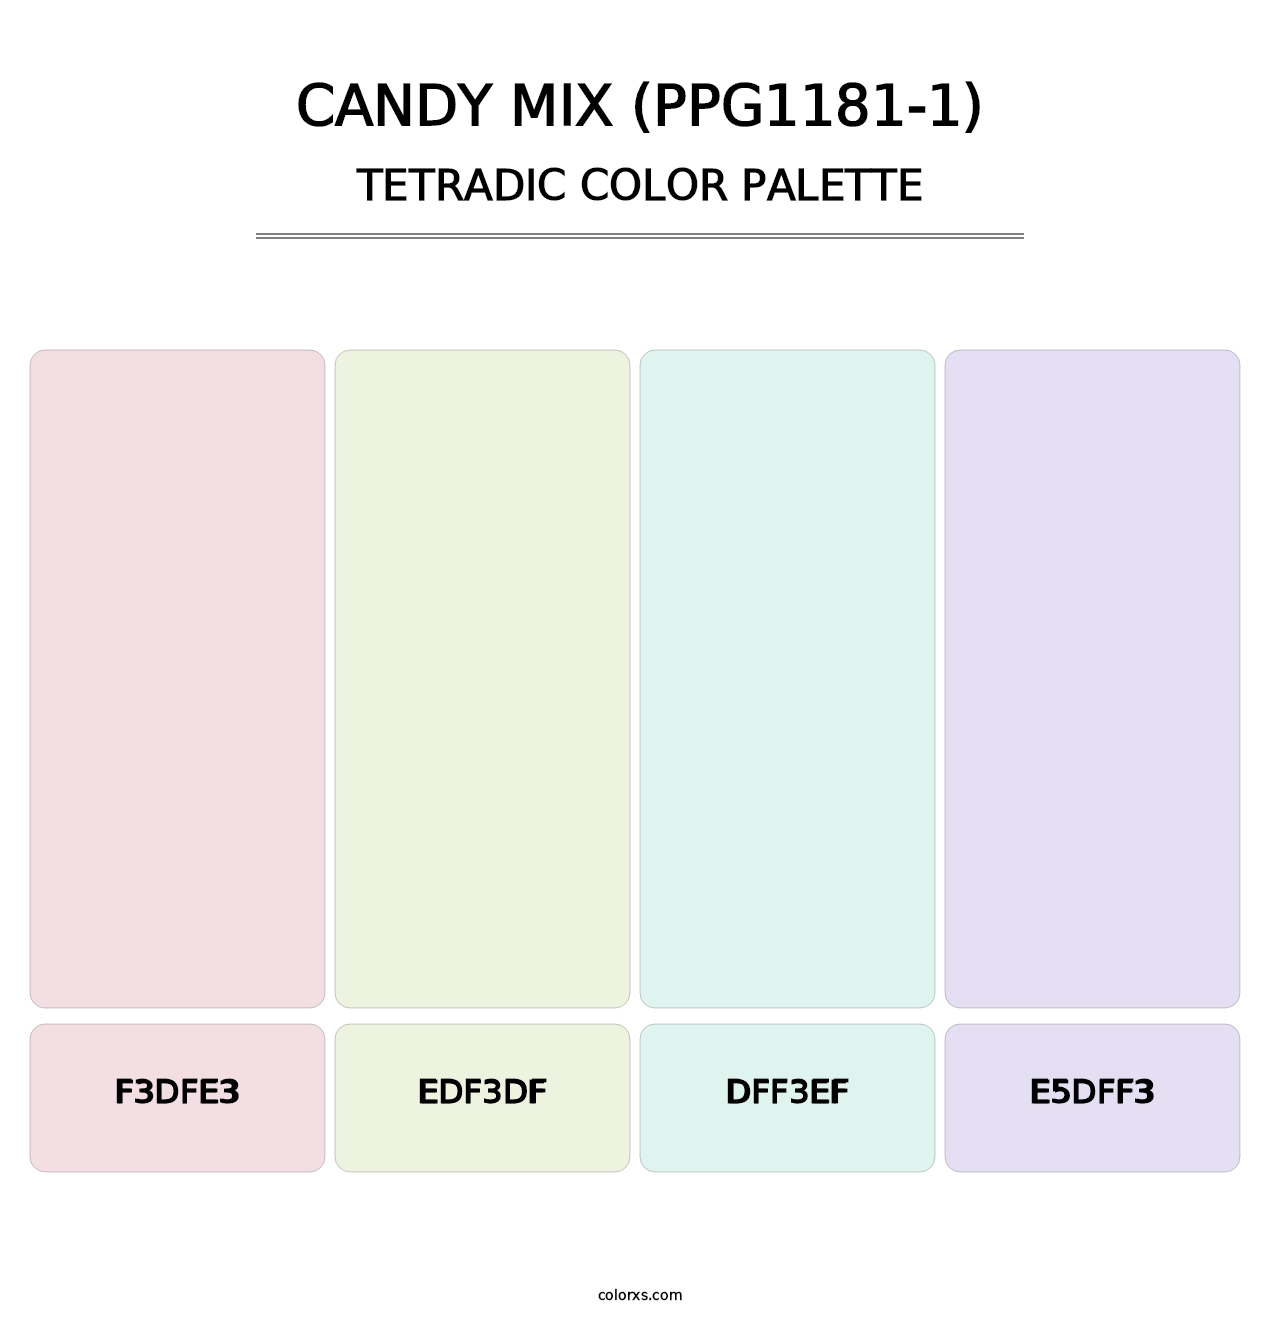 Candy Mix (PPG1181-1) - Tetradic Color Palette